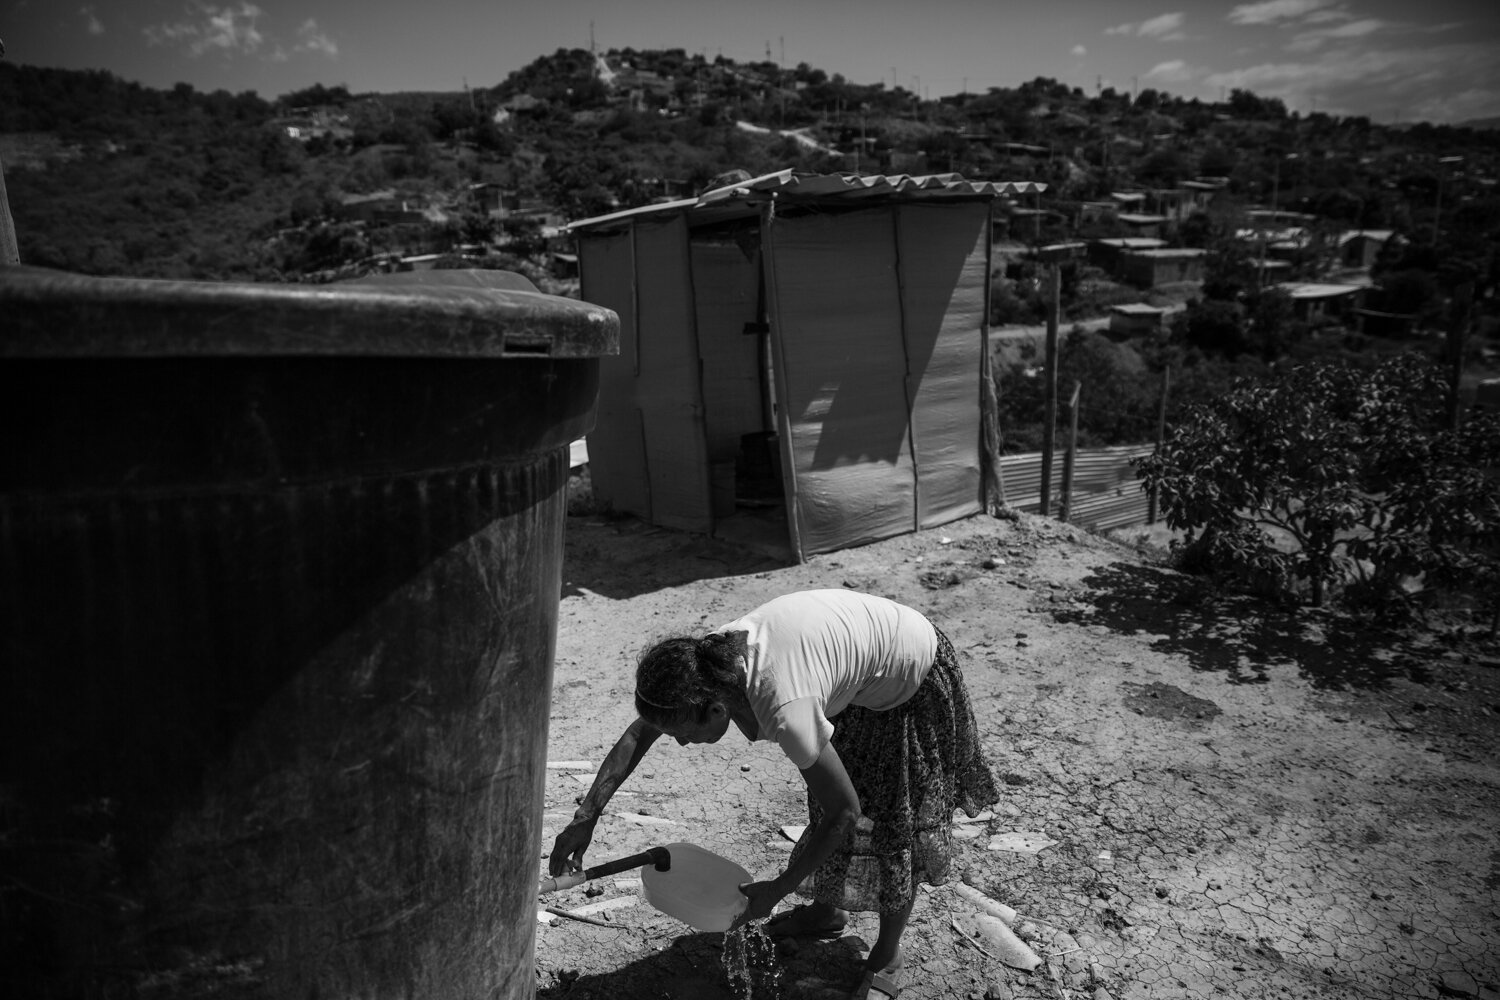  Yenis Davila fills a container with drinking water from a storage tank in the backyard. Some families have received donated water tanks from charity organizations. Others keep multiple buckets of water filled to the top at all times – split between 